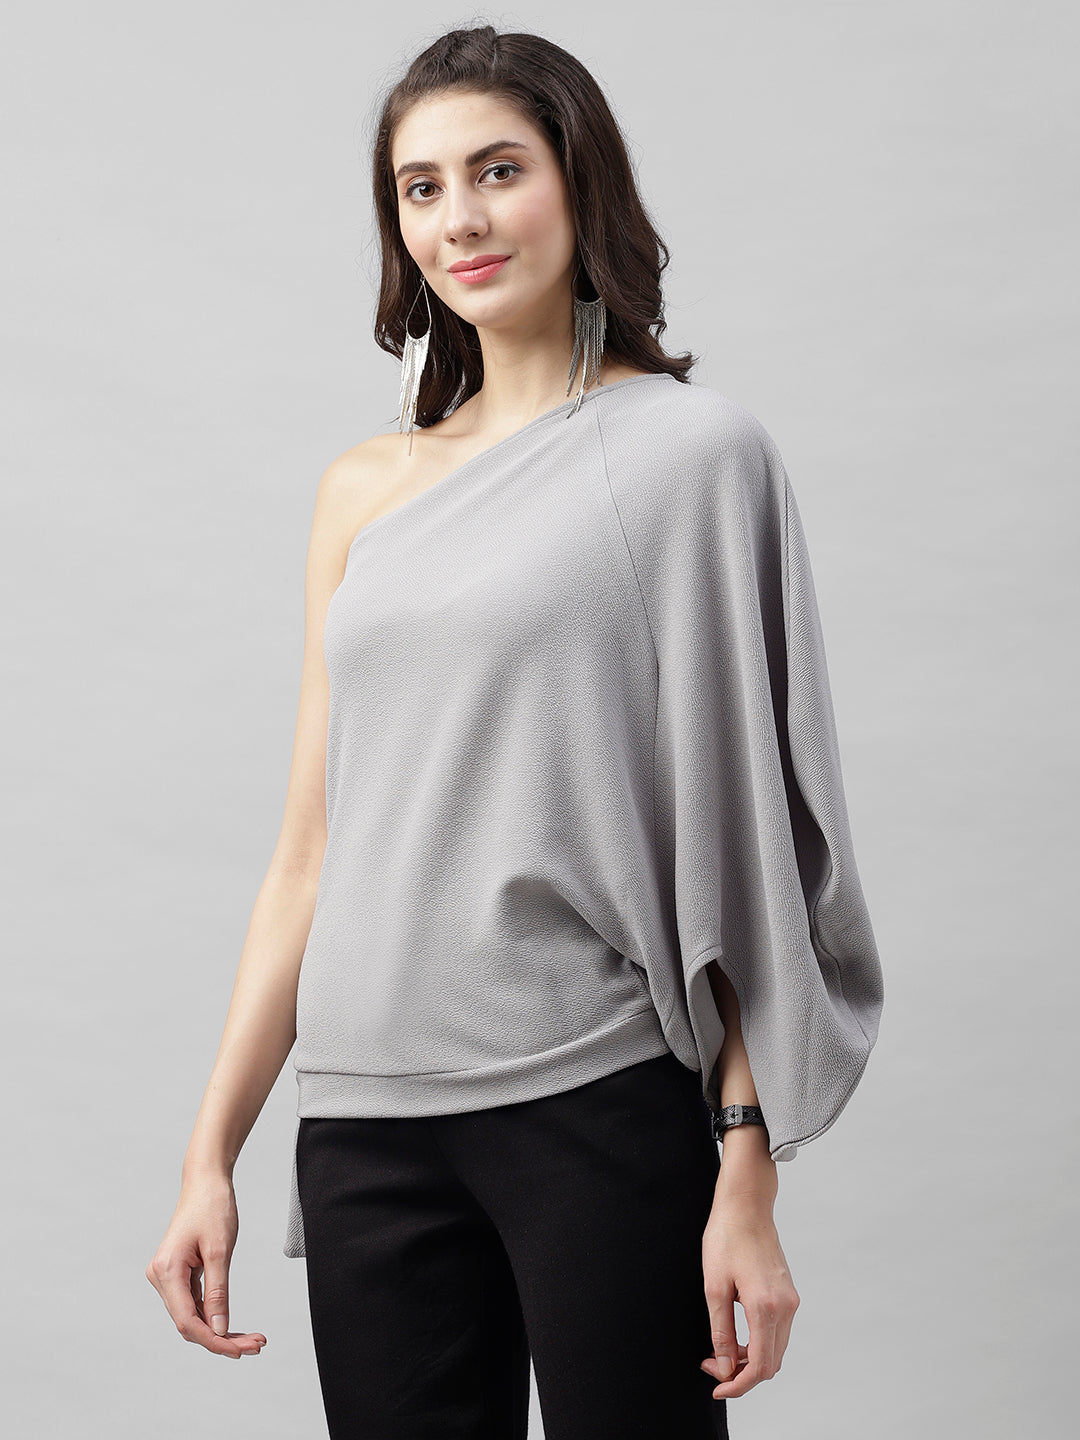 Athena Women Grey Solid One Shoulder Top with Side Knot Detail - Athena Lifestyle